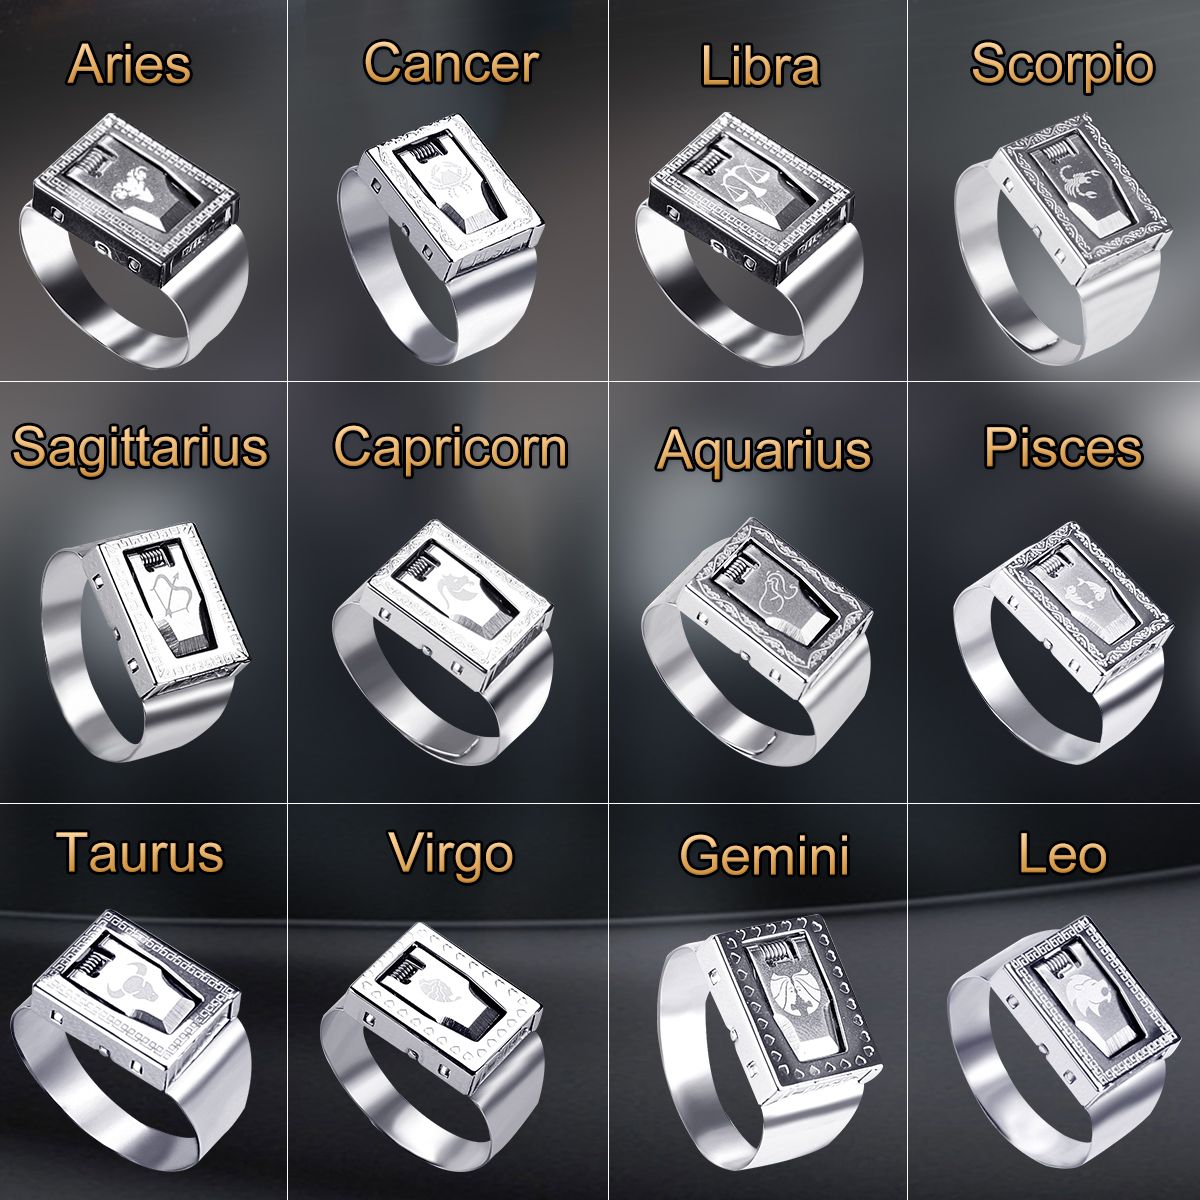 12-Constellation-Self-Protection-Ring-Body-Guard-Ring-Invisibility-Hidden-Ring-Blade-Emergency-Rescu-1423398